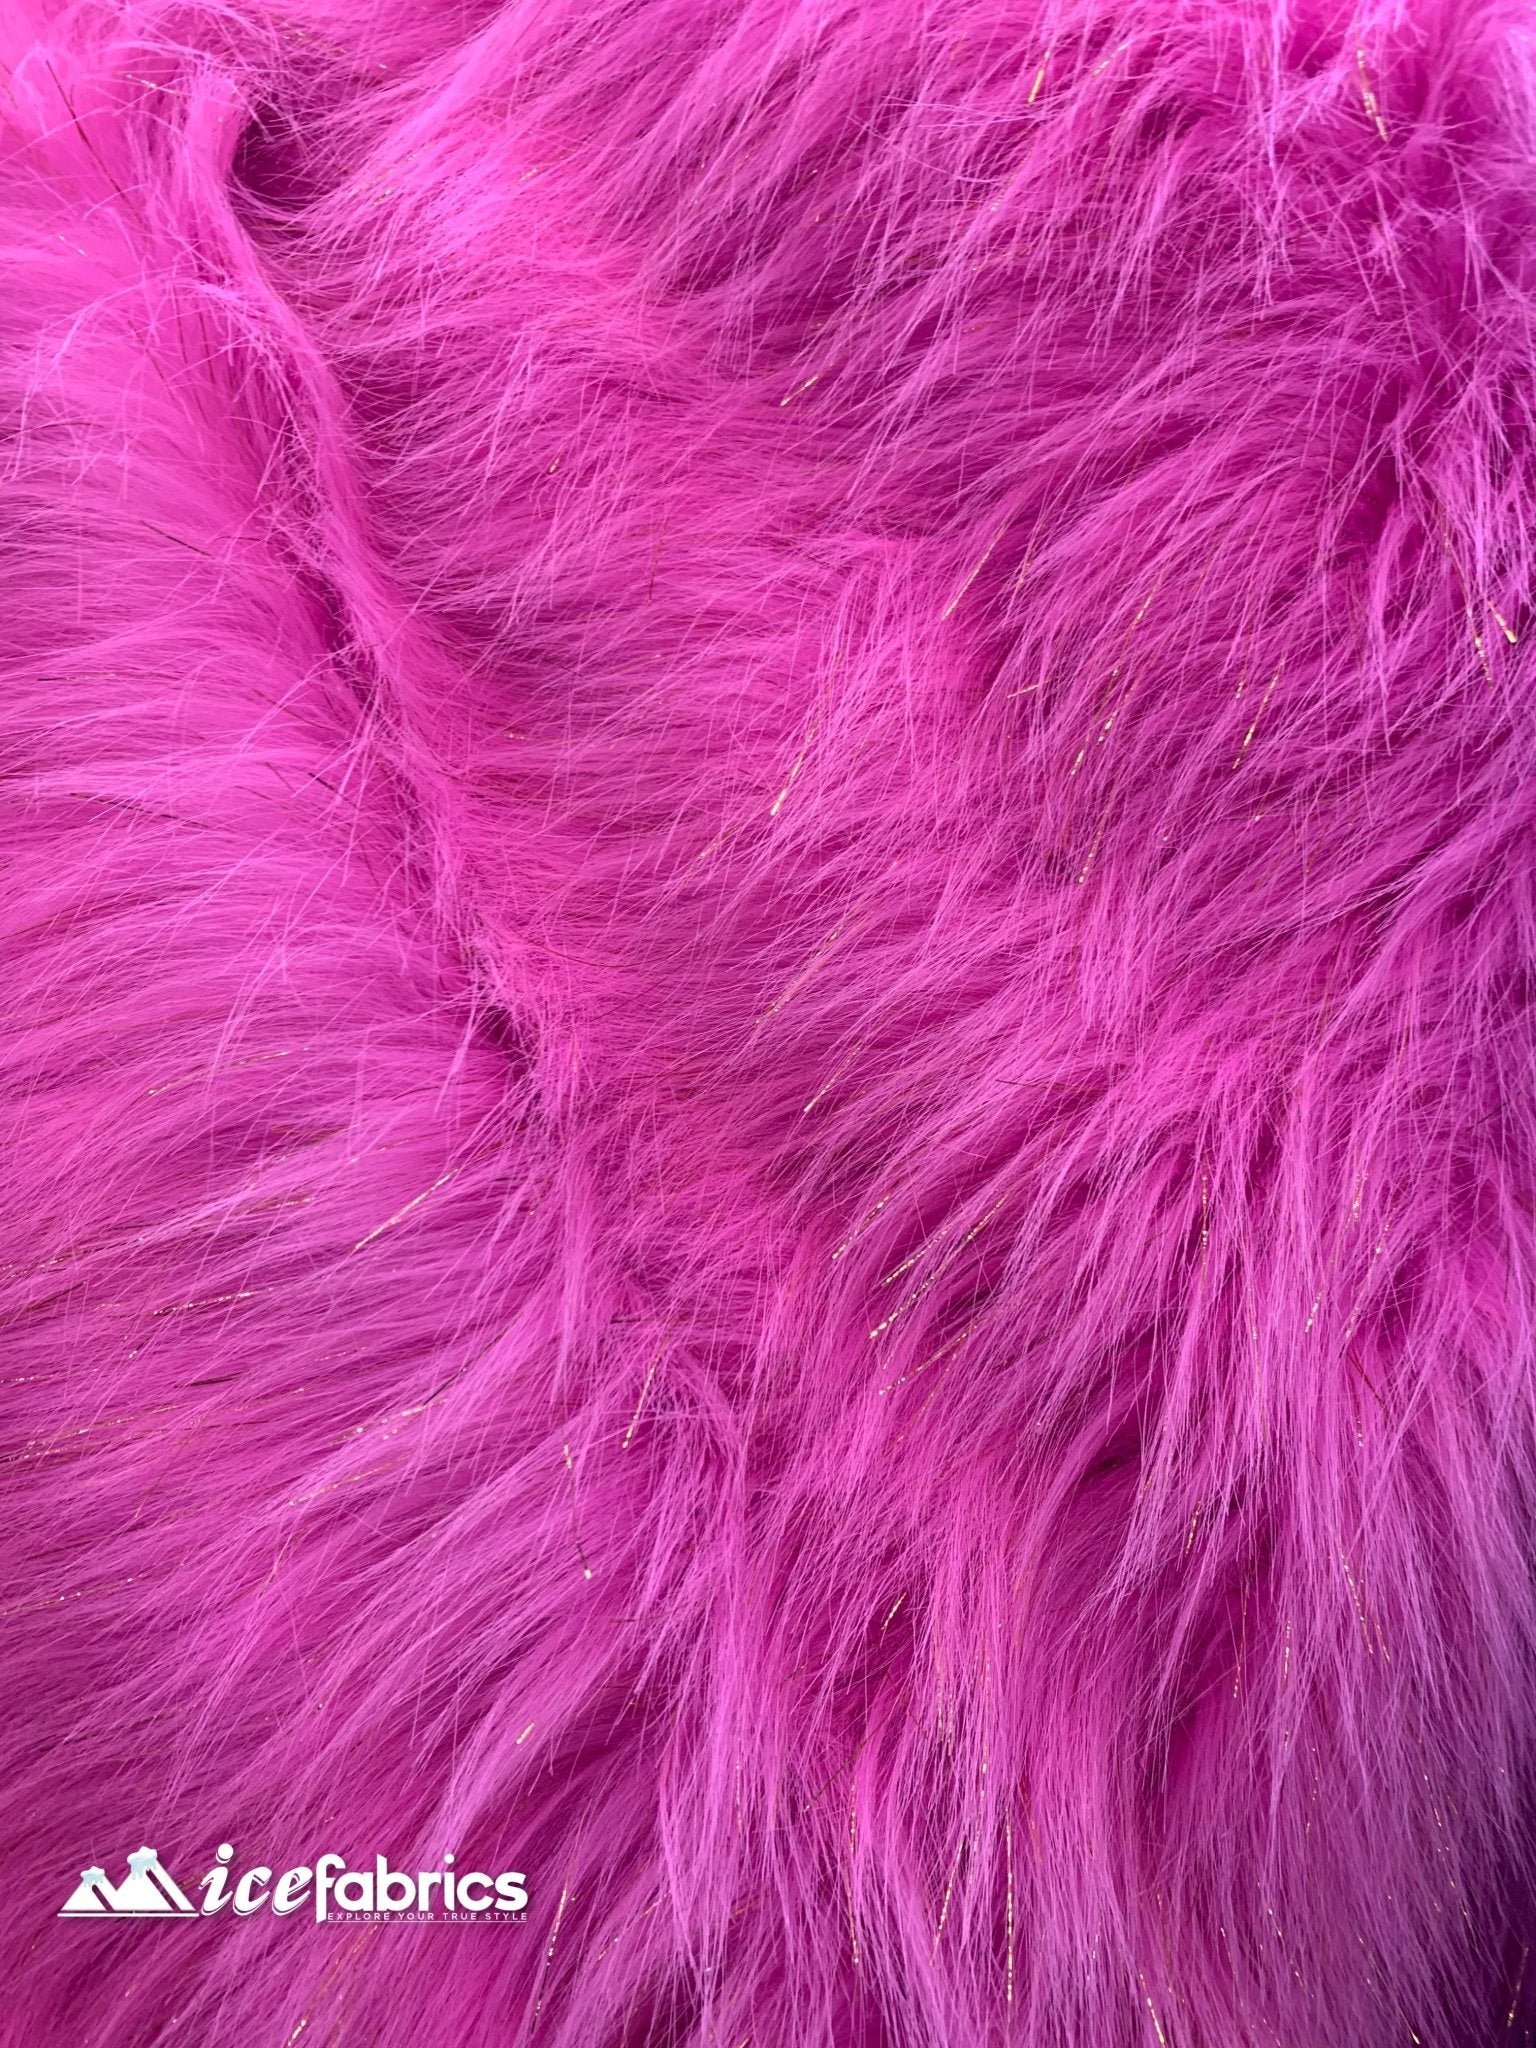 Tinsel Long Pile Mongolian Faux Fur Fabric By The Yard Fashion FabricICEFABRICICE FABRICSPinkBy The Yard (60 inches Wide)Tinsel Long Pile Mongolian Faux Fur Fabric By The Yard Fashion Fabric ICEFABRIC